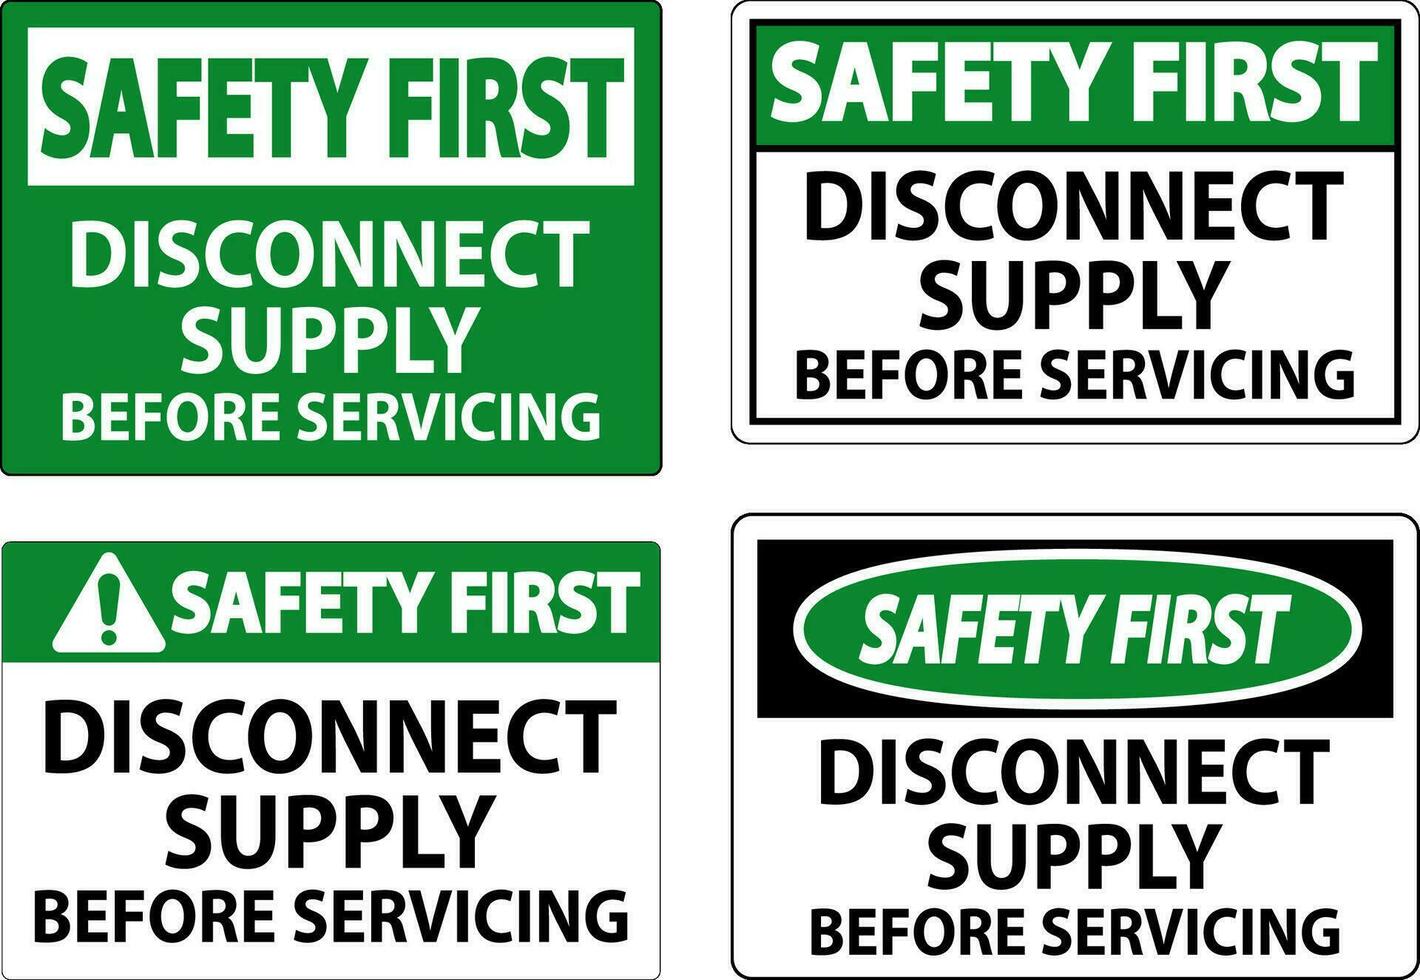 Safety First Sign Disconnect Supply Before Servicing Sign vector